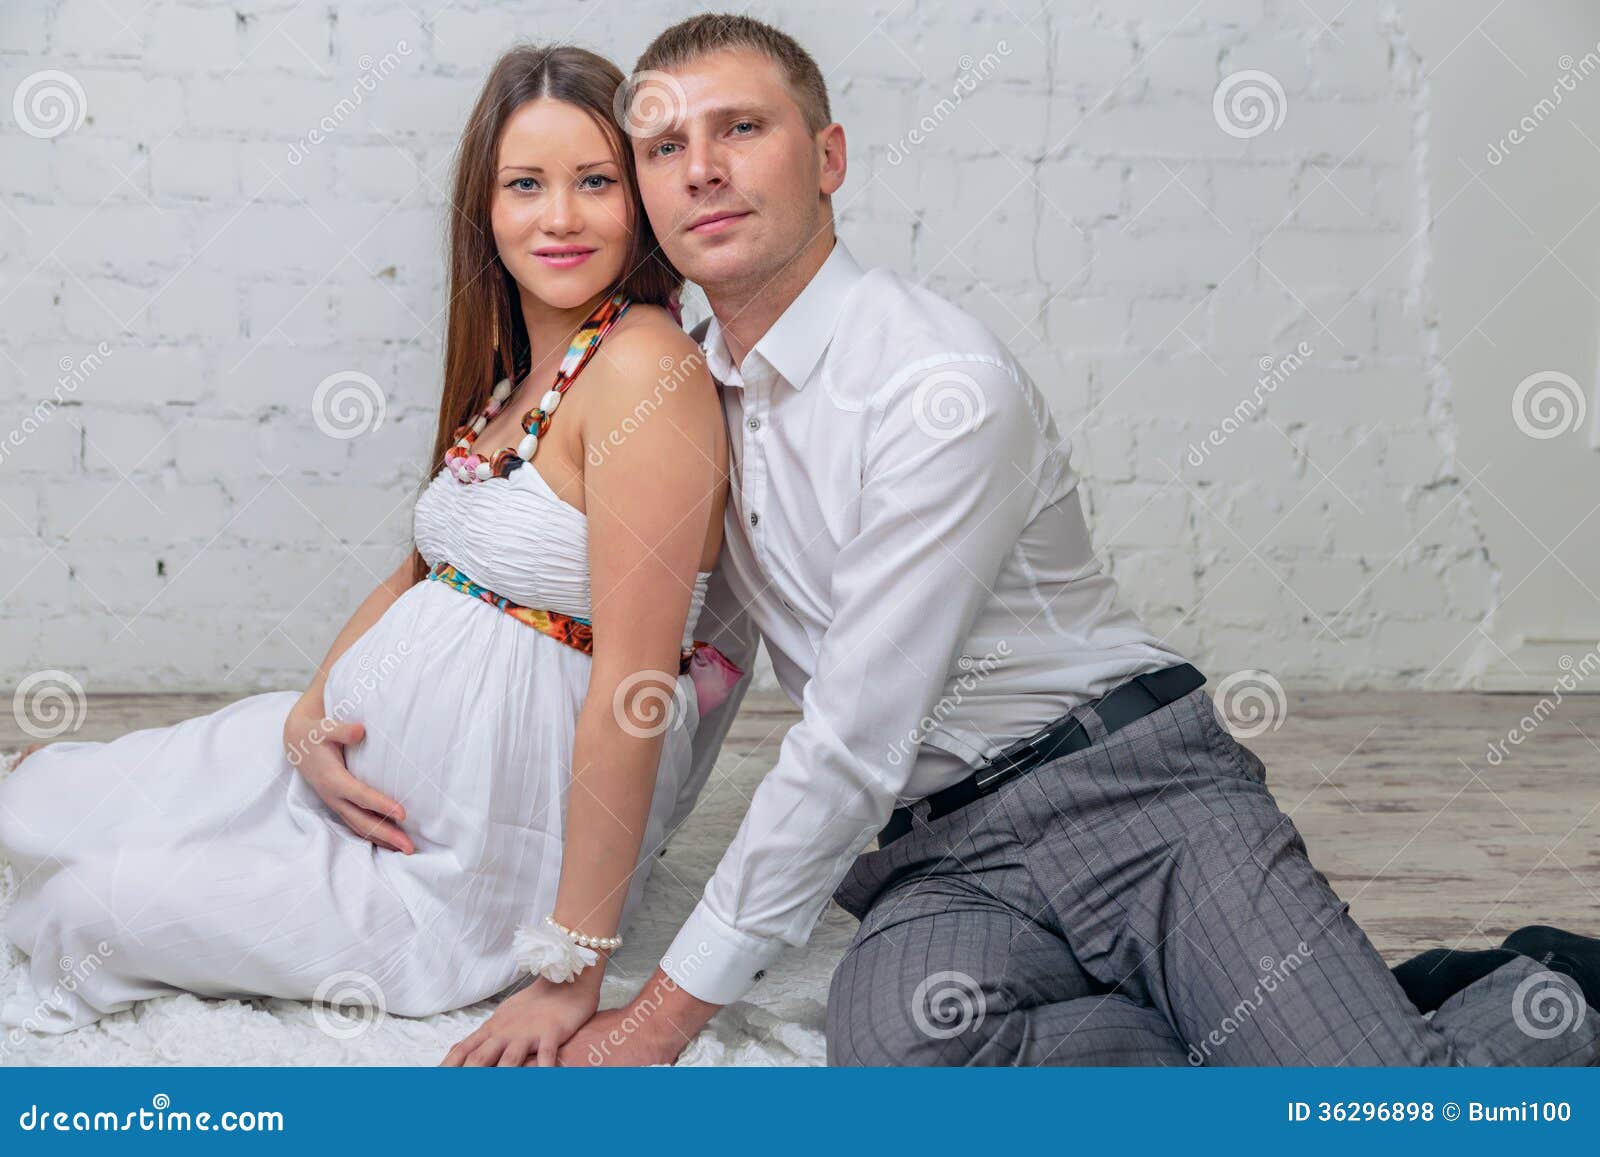 Man is Embracing His Pregnant Wife Stock Photo pic